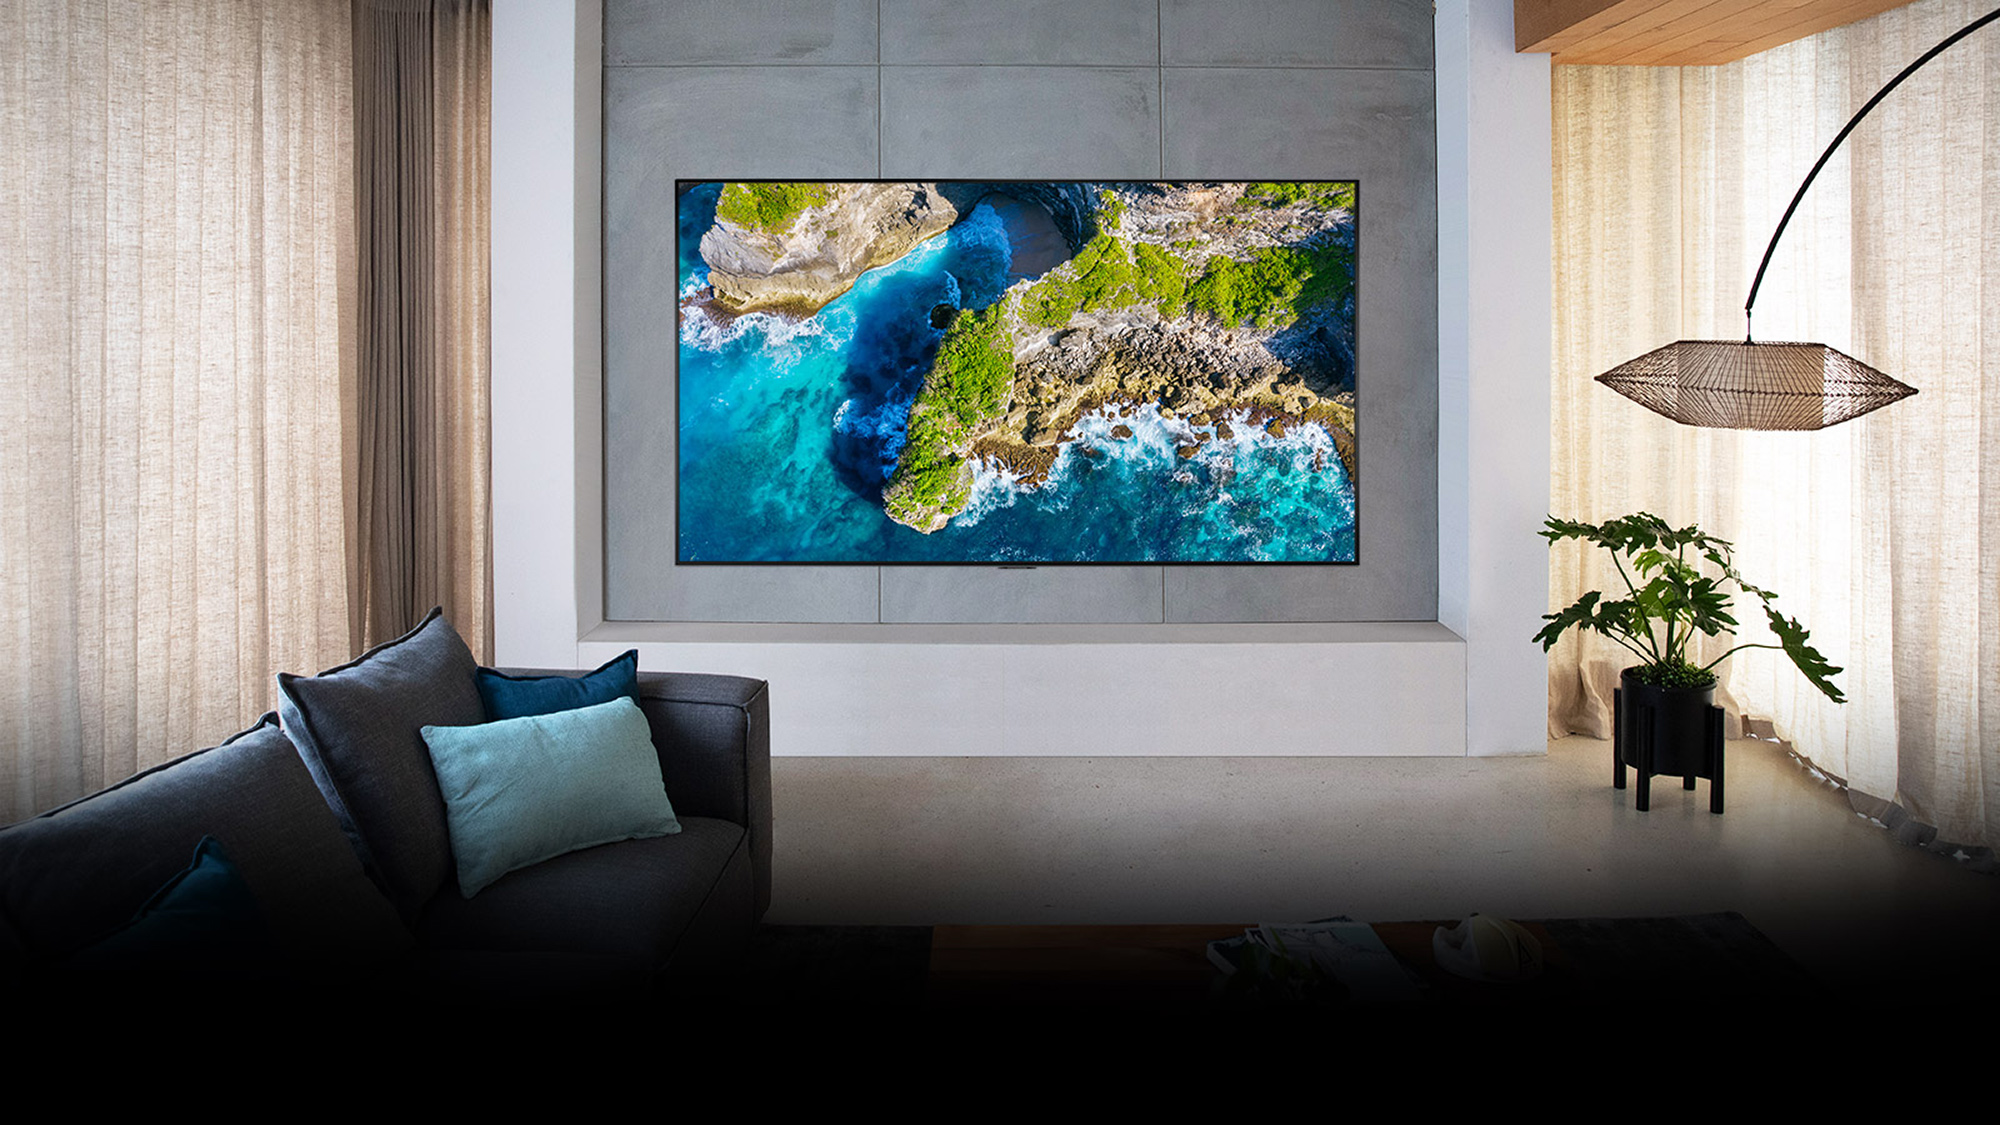 Best OLED TVs in 2021 LG, Vizio, Sony and more Tom's Guide